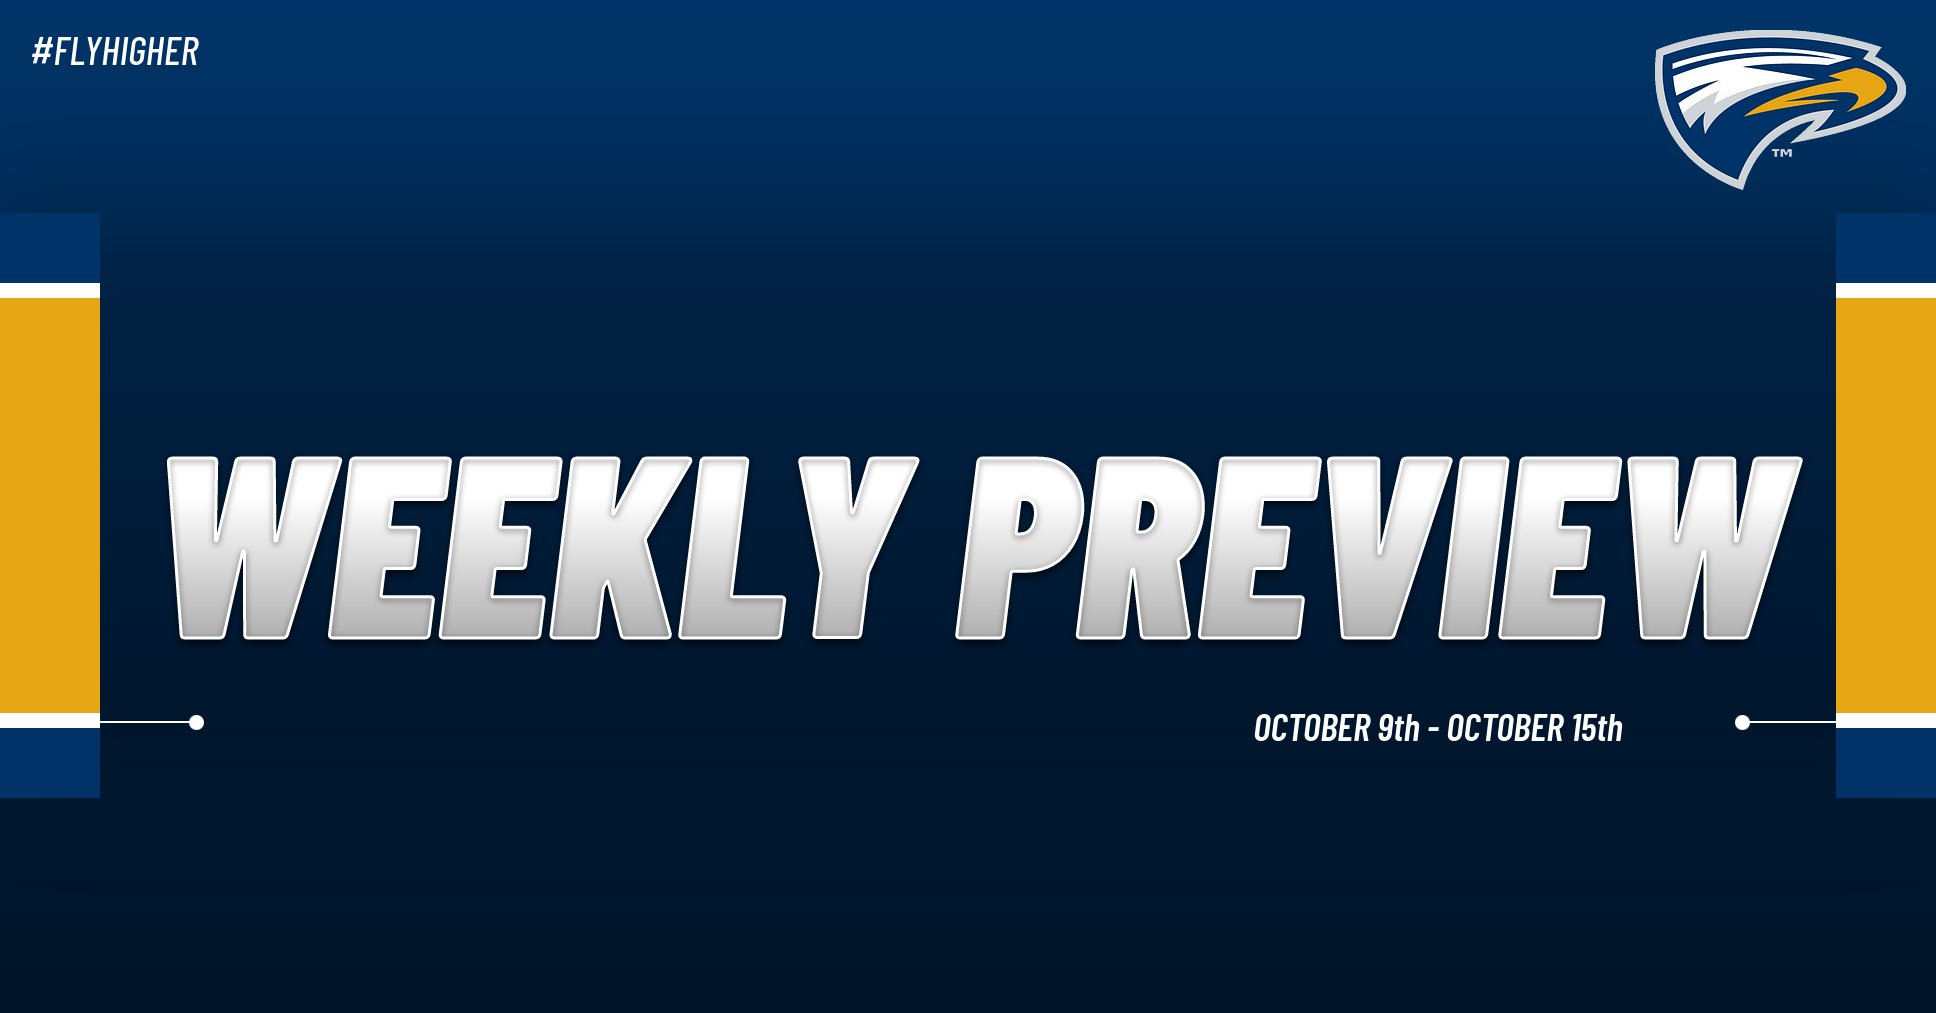 Emory Athletics Weekly Preview: October 9th - October 15th